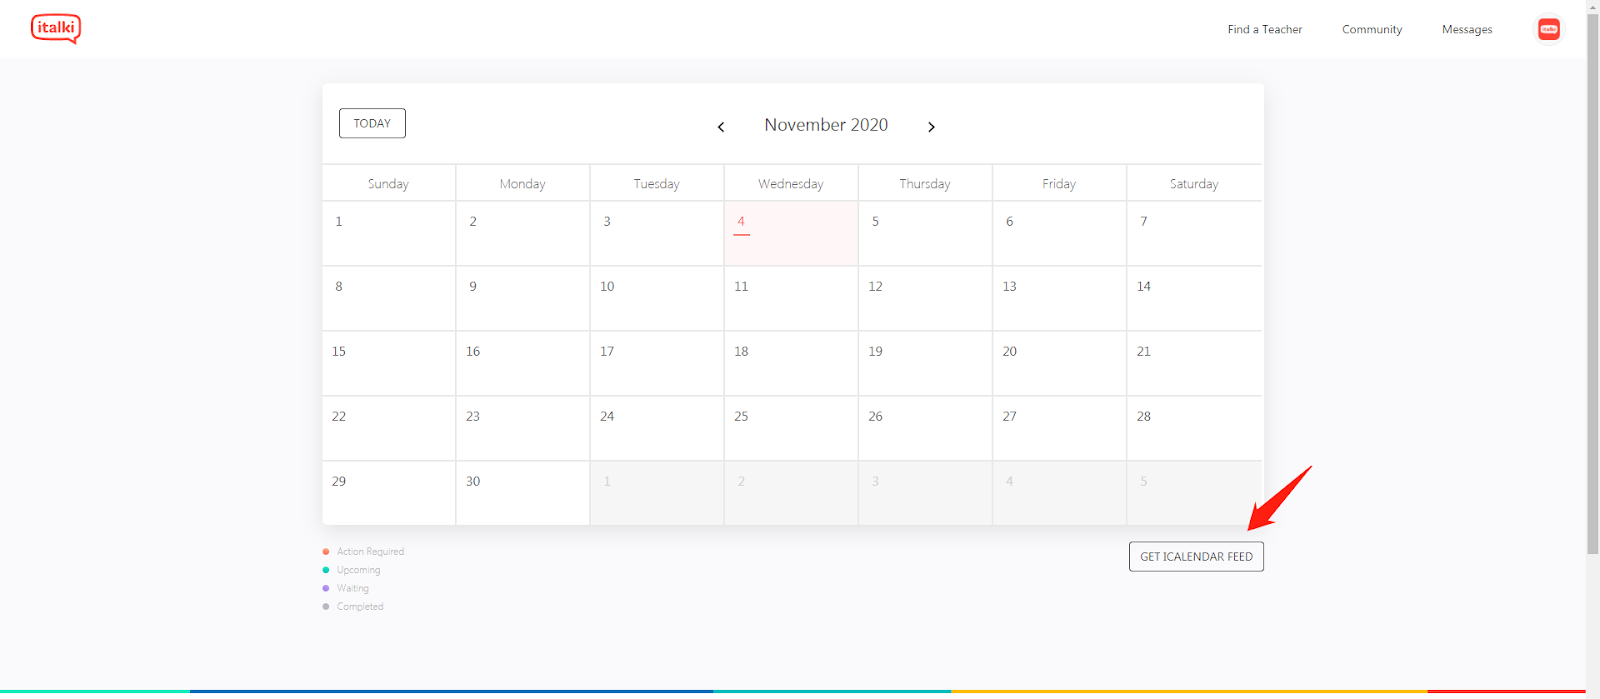 How do I subscribe to italki Calendar to sync my lessons? italki Help